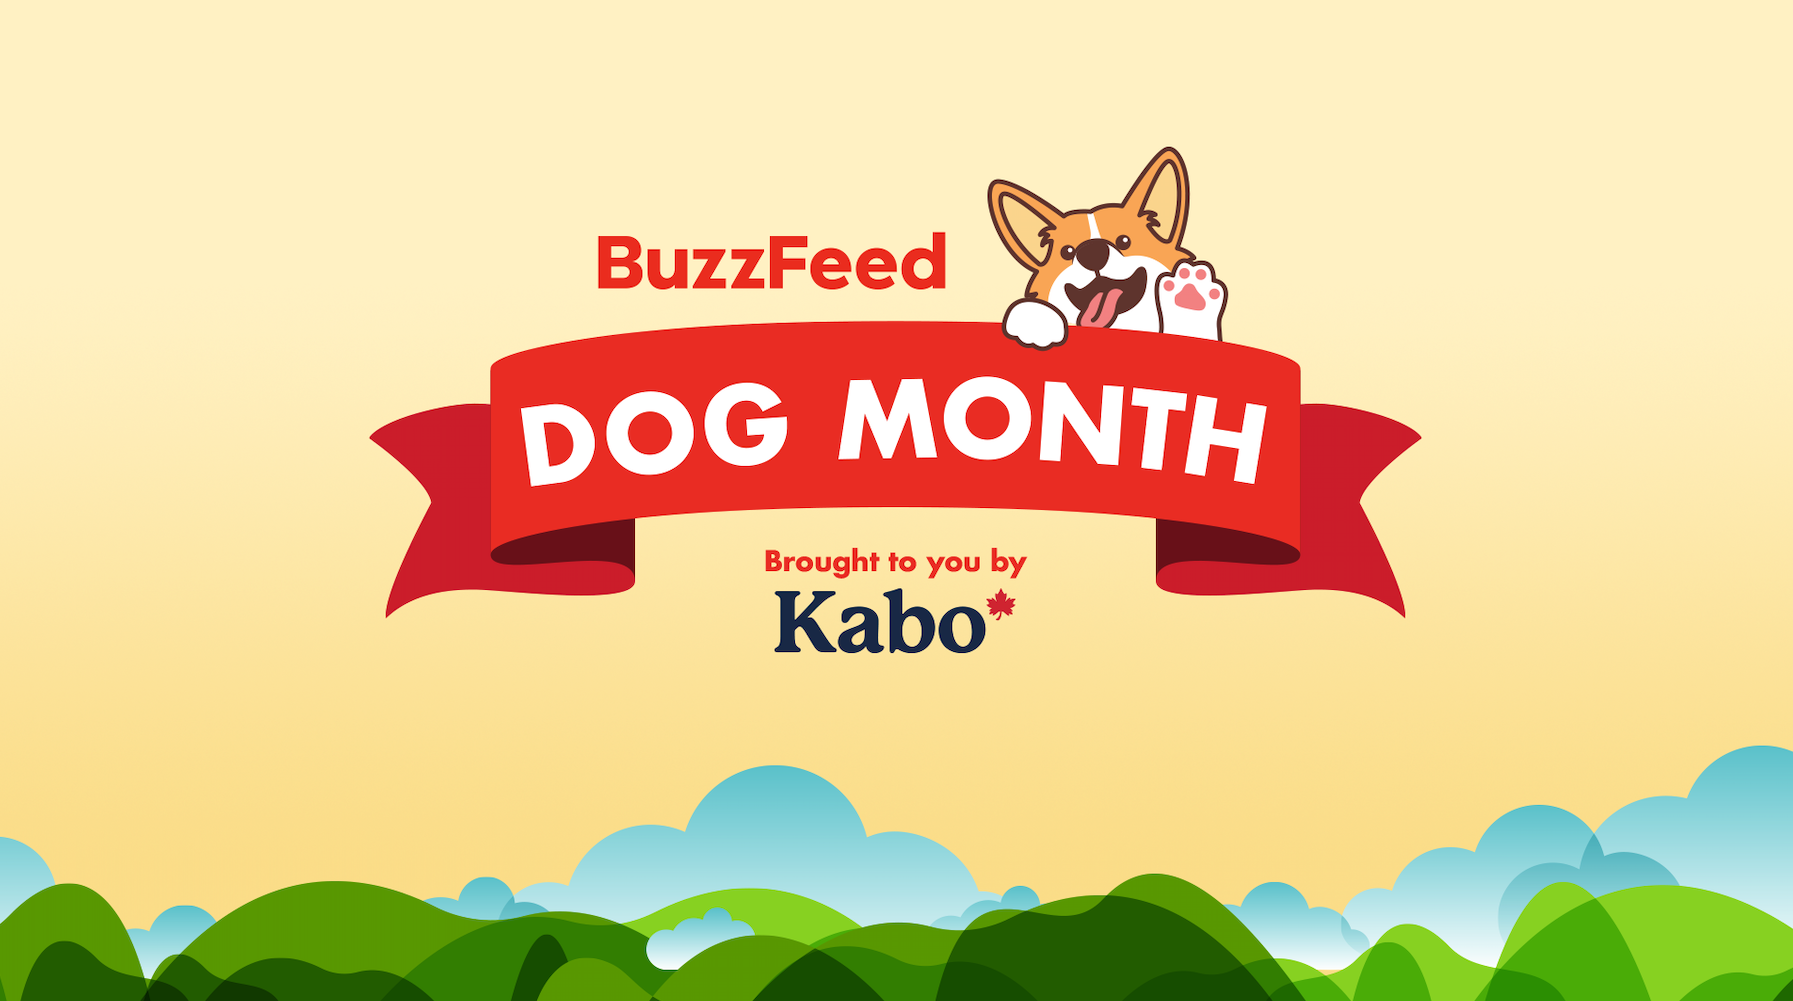 BuzzFeed Dog Month, brought to you by Kabo